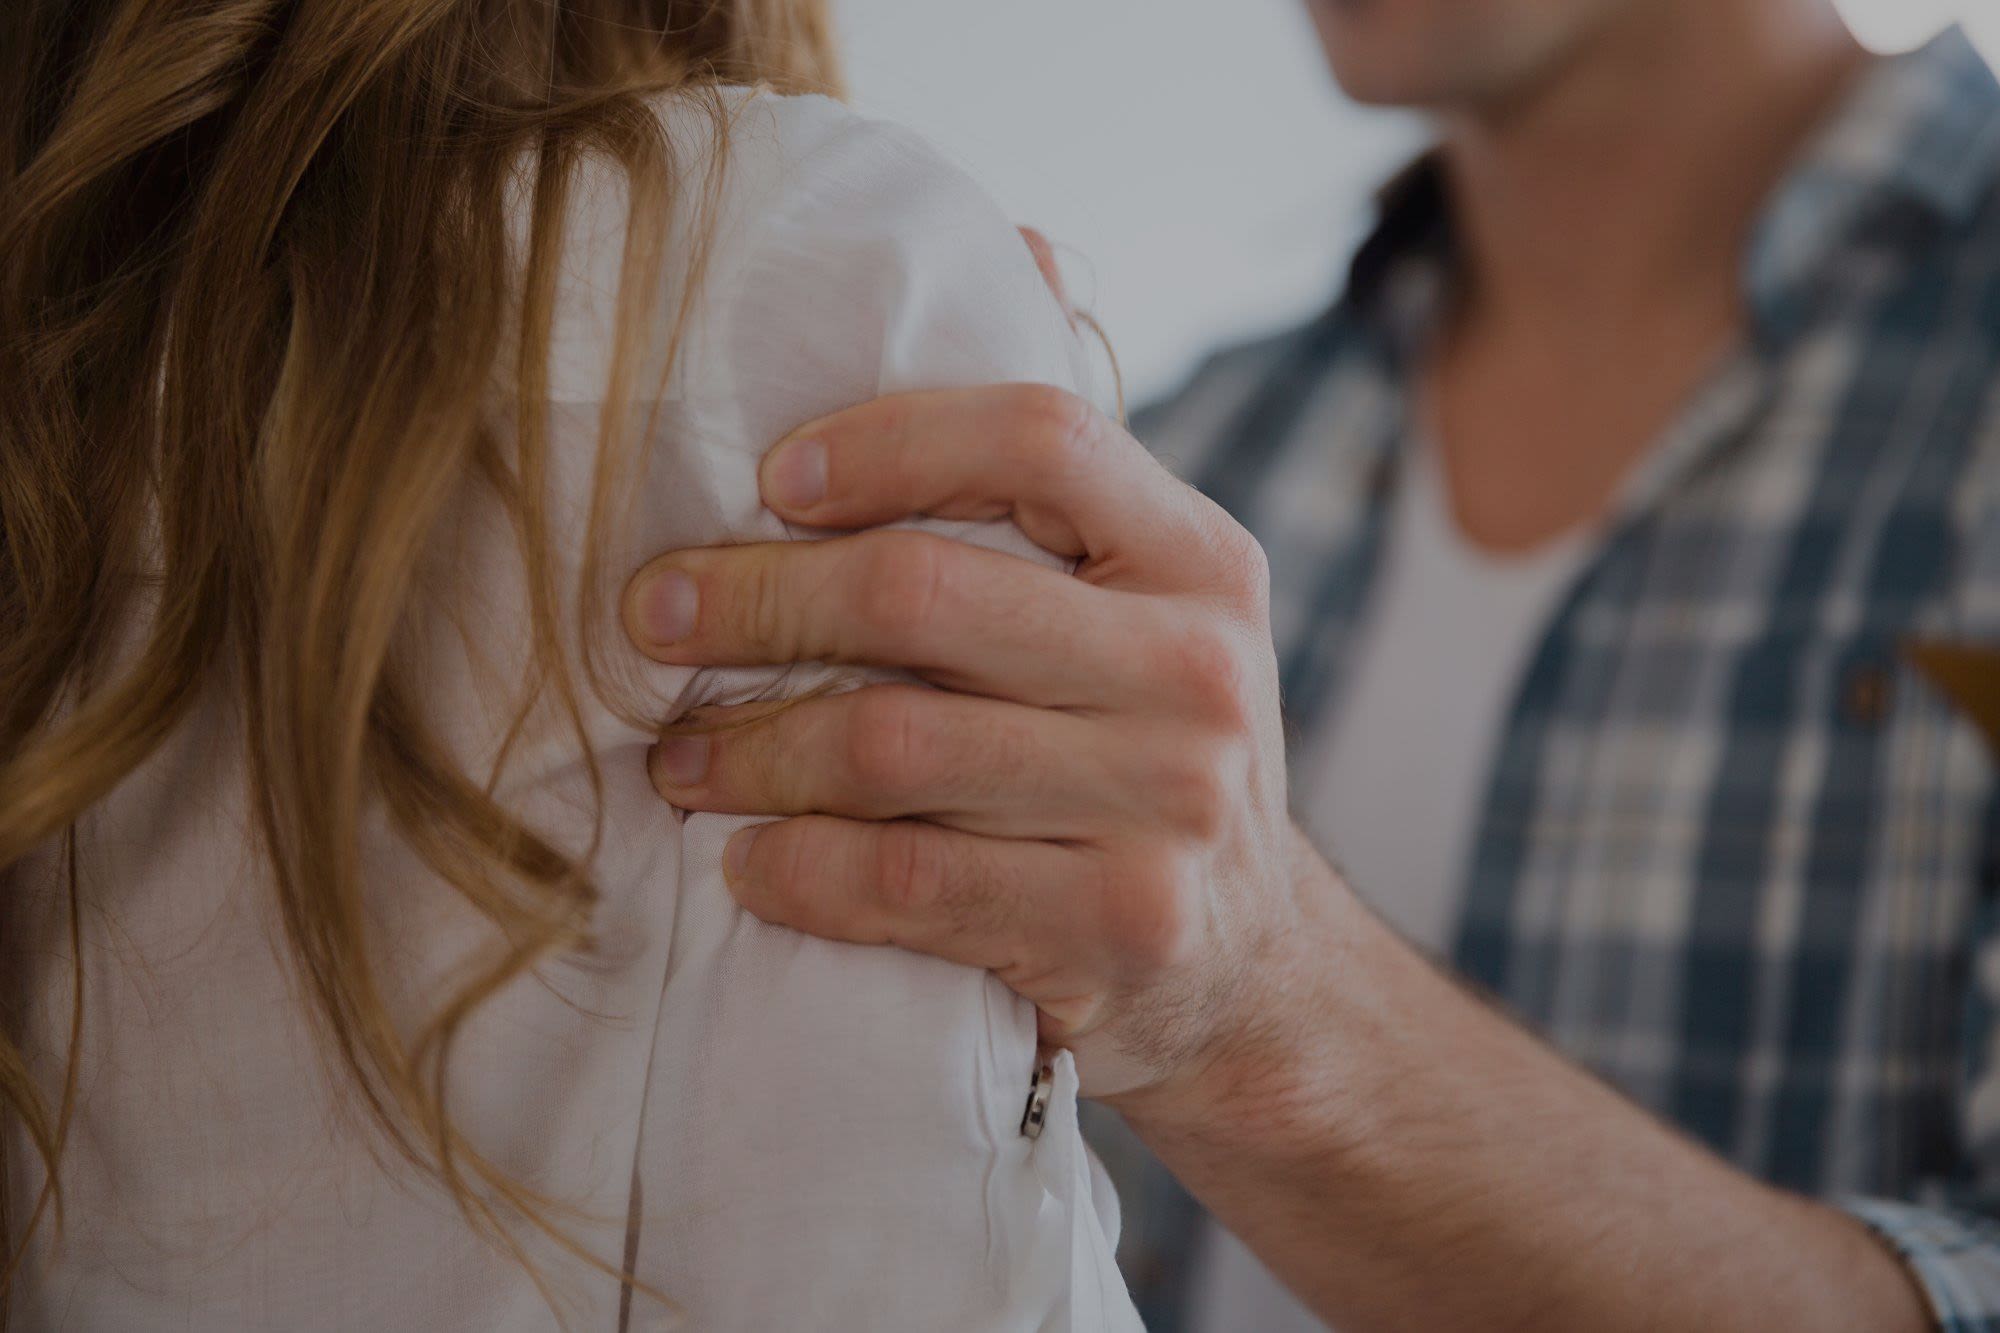 Image of a hand grabbing a female shoulder to demonstrate an example of domestic violence